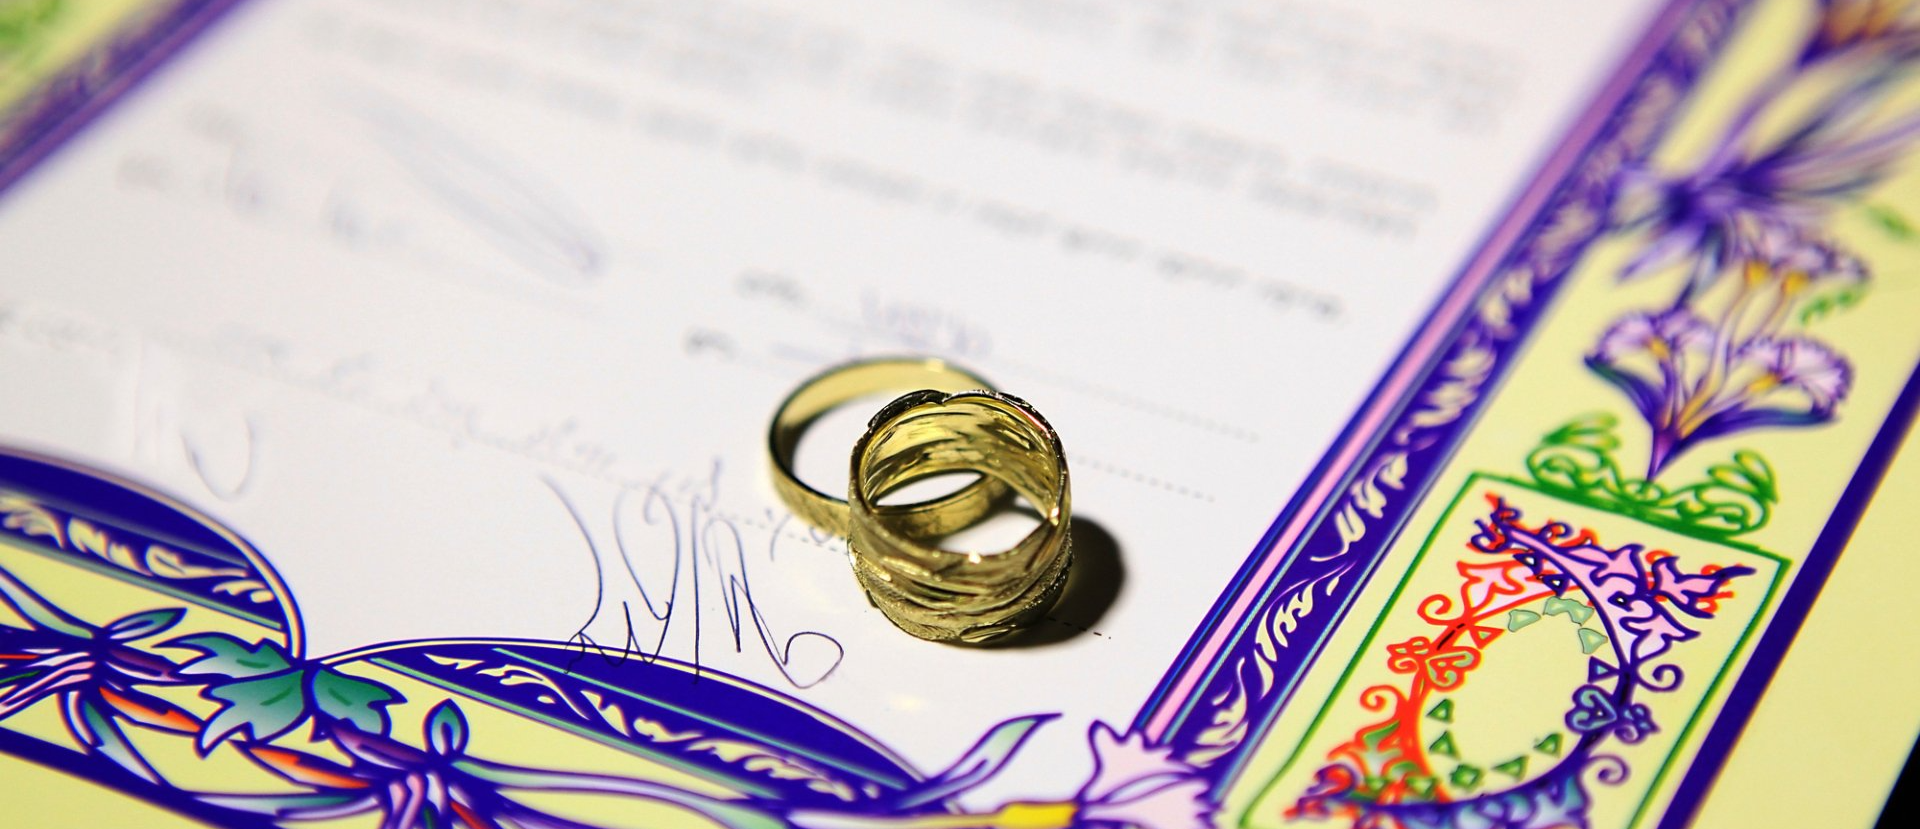 marriage contract with rings on top